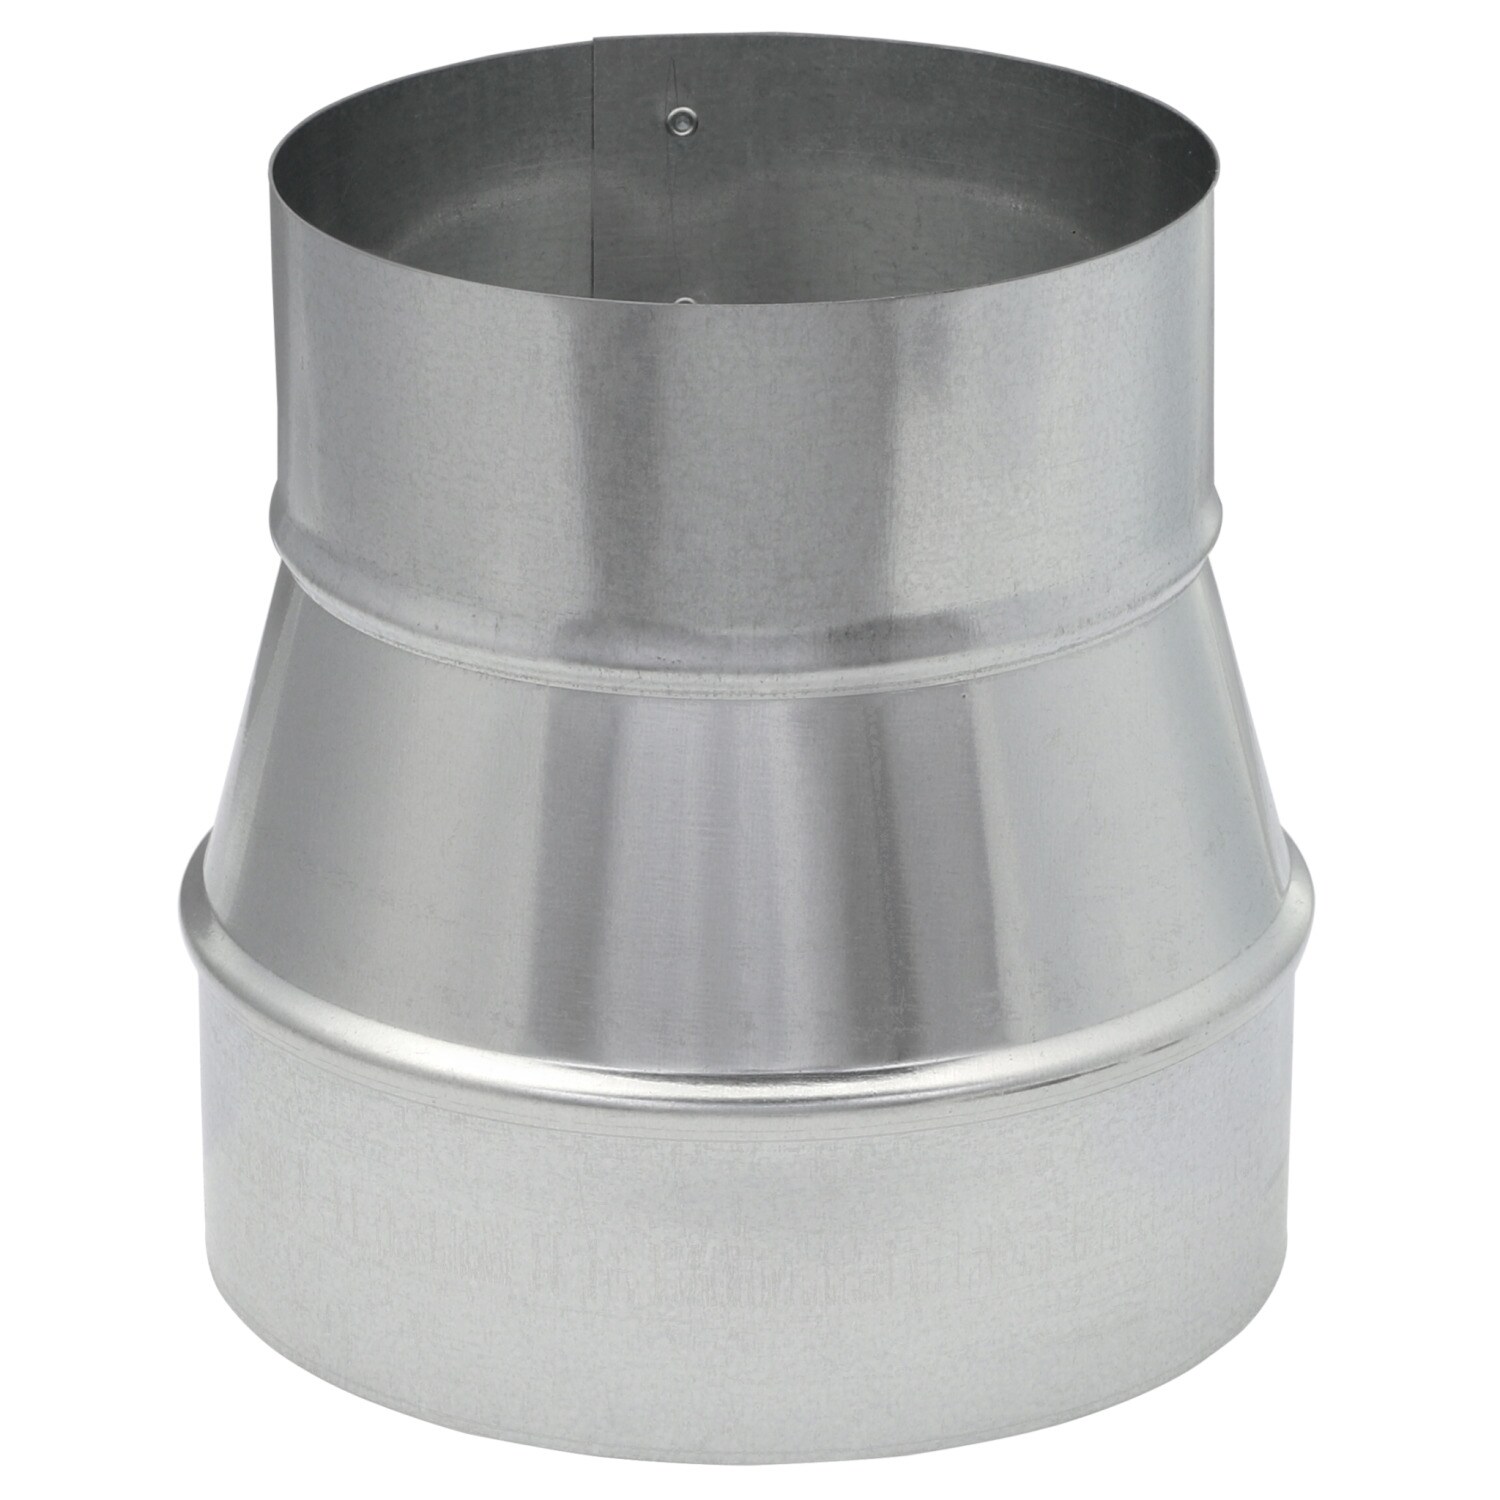 Duct Reducer Round Pipe Connector Steel 6" x 4" Diameter Stove Pipe Connection 